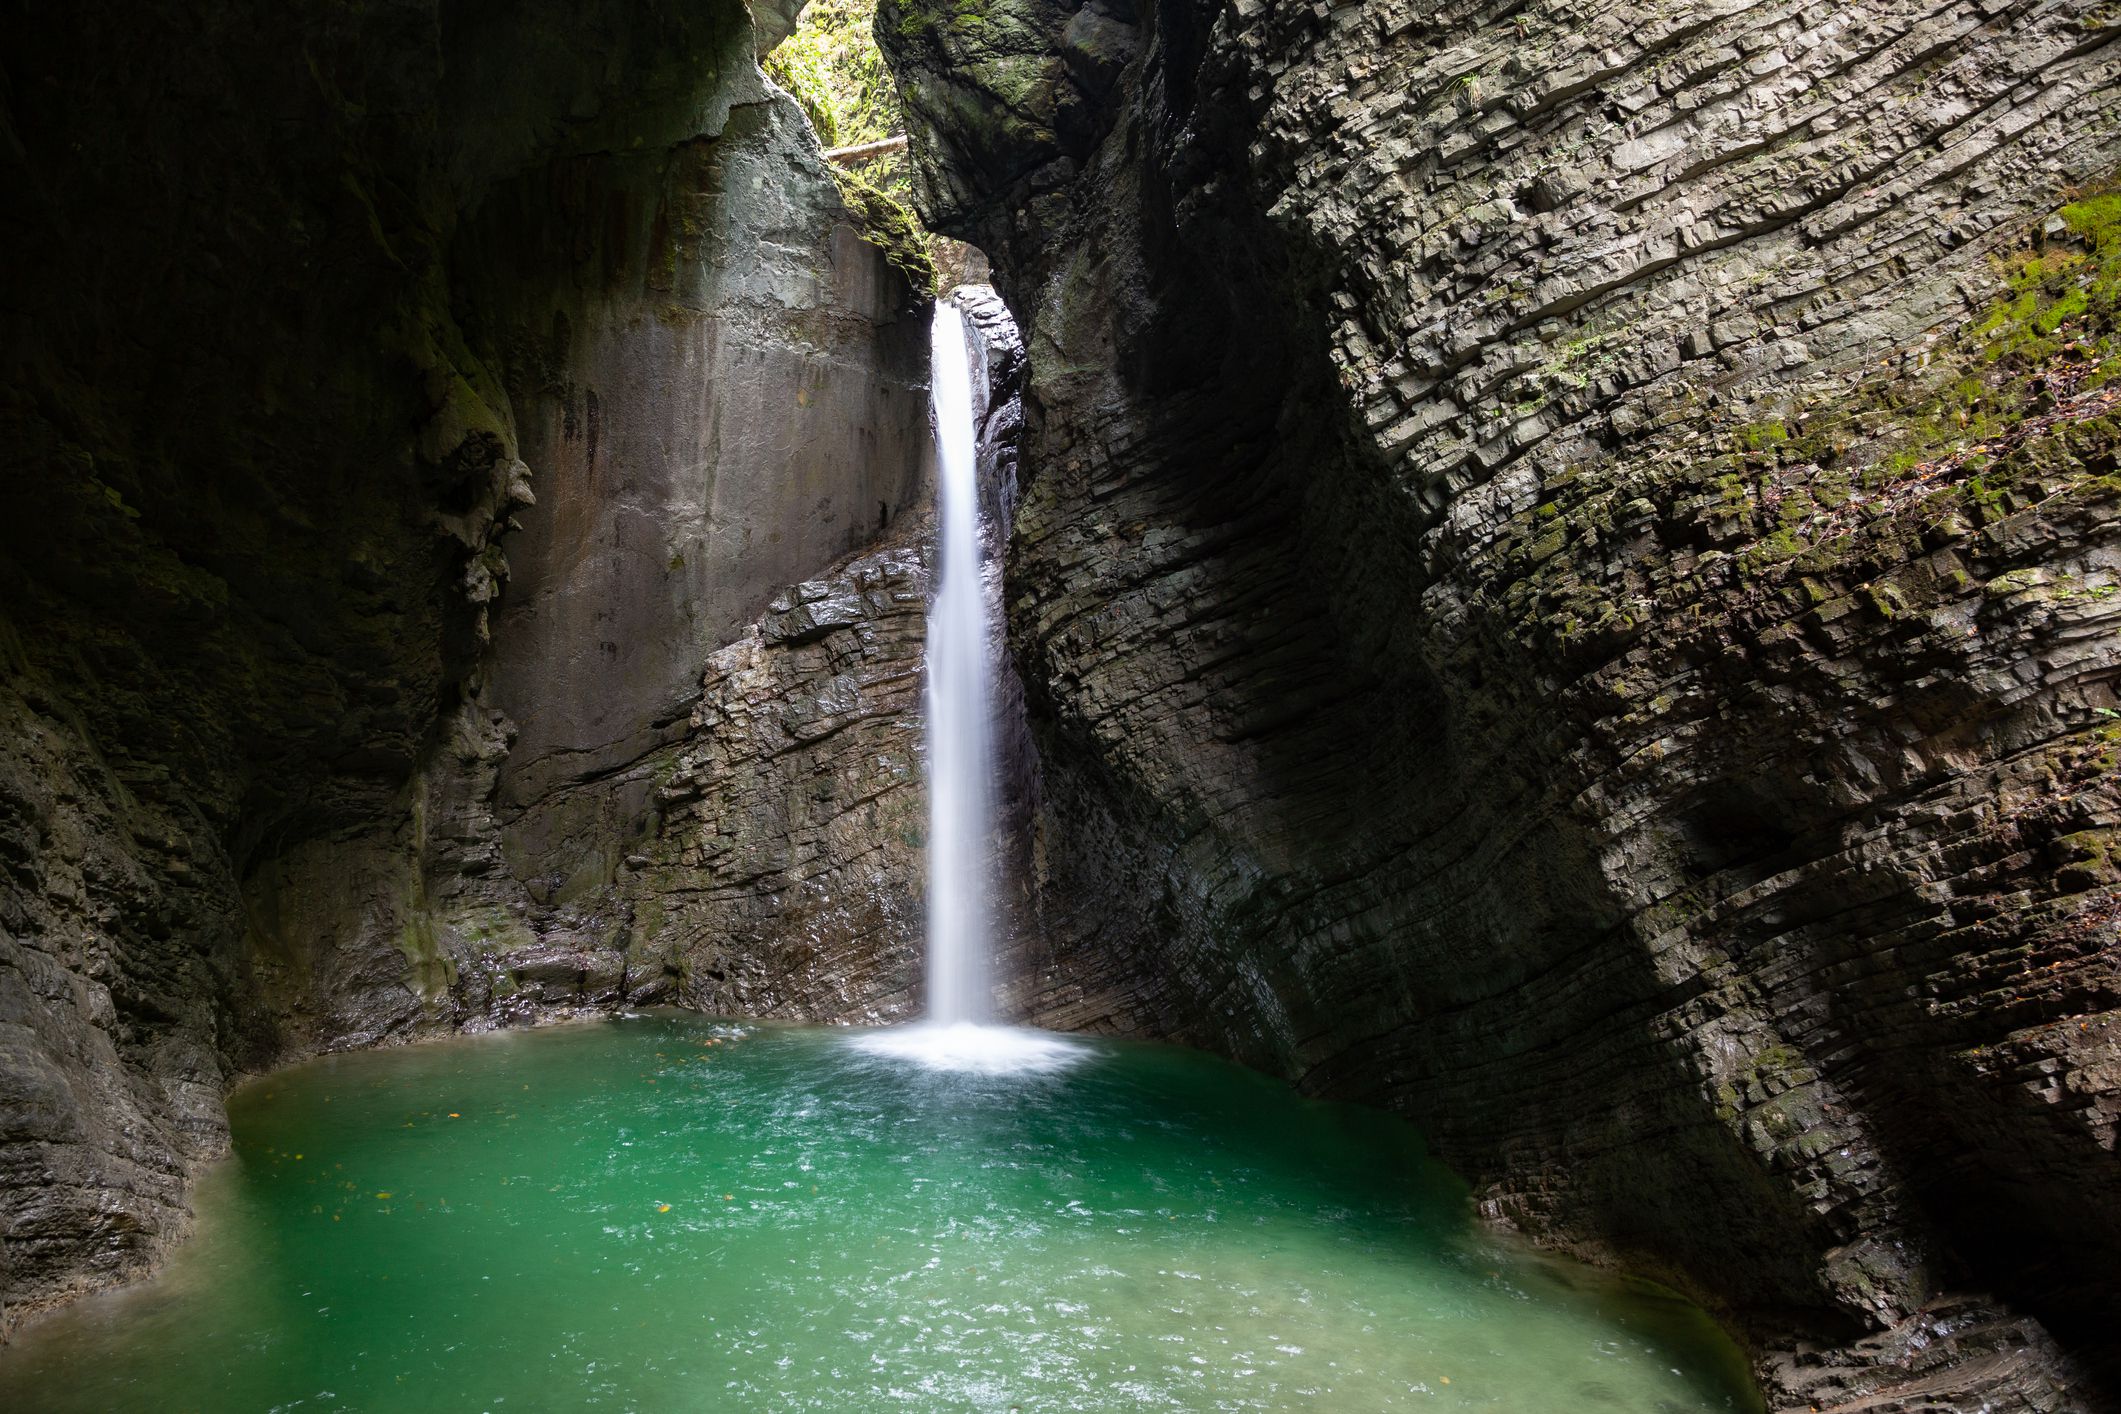 Slide 10 of 52: A 15-meter waterfall splashes down in this mossy, limestone cave near Kobarid, Slovenia.